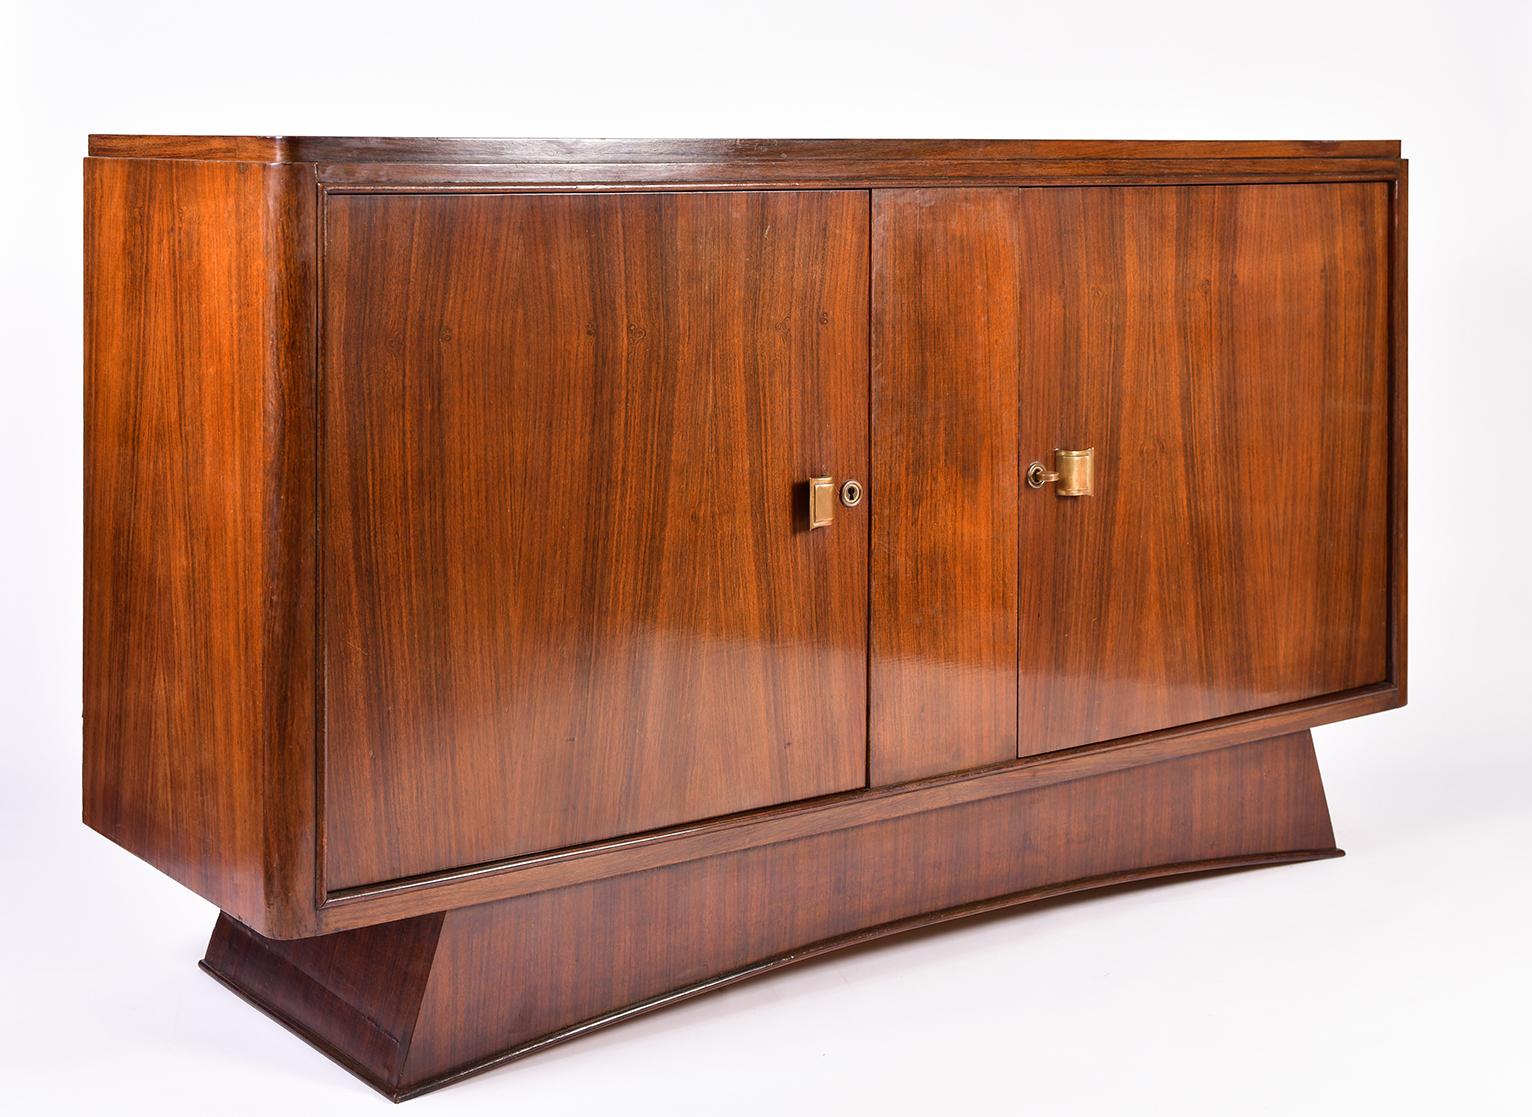 An Art Deco mahogany sideboard, on a bowed base, the two doors with shaped brass handles and the original key, revealing an oak fitted interiors, with an adjustable shelf and a drawer, adorned with geometric marquetry.
France, circa 1930.